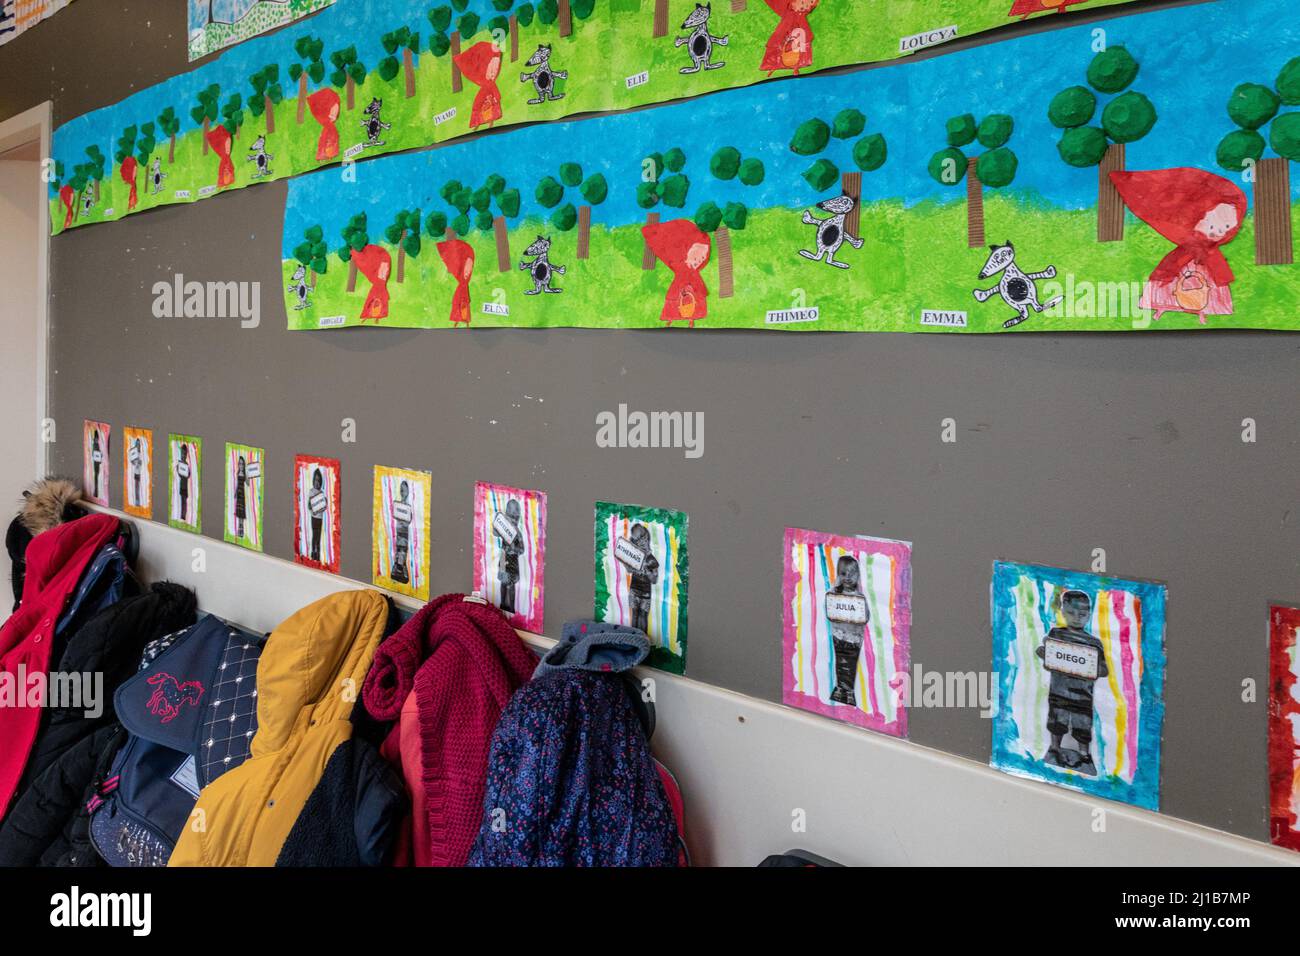 COAT WITH THE CILD'S FIRST NAME, NURSERY SCHOOL, CHARENTE-MARITIME, FRANCE Stock Photo